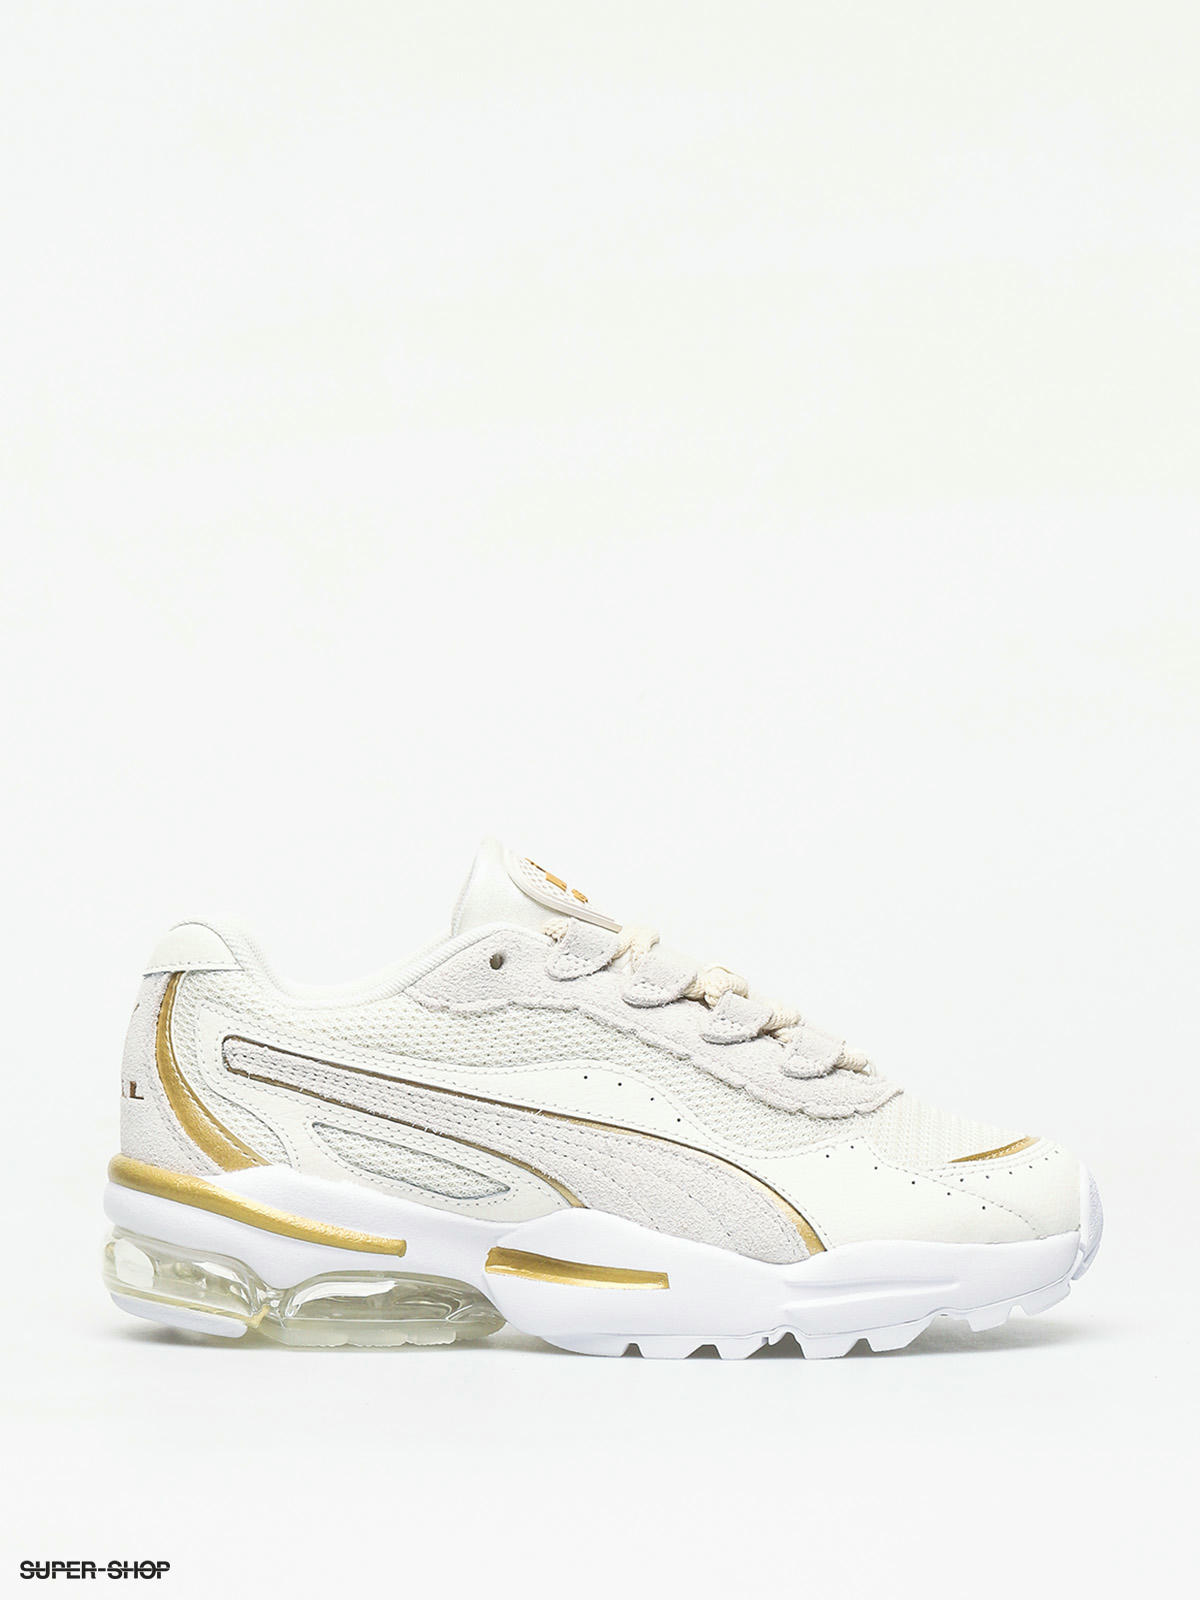 new puma shoes white and gold